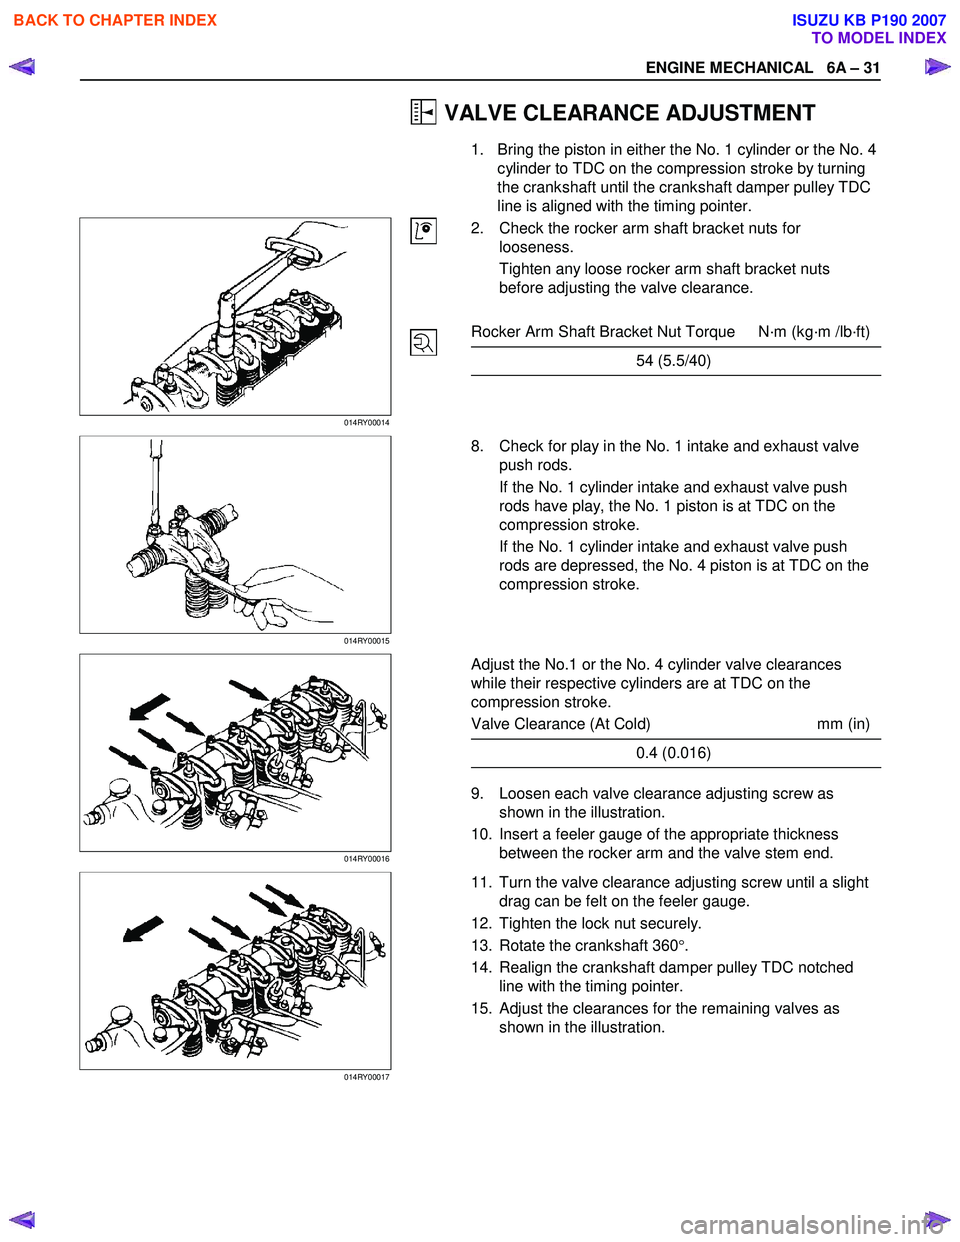 ISUZU KB P190 2007  Workshop Repair Manual ENGINE MECHANICAL   6A – 31 
 VALVE CLEARANCE ADJUSTMENT 
1.  Bring the piston in either the No. 1 cylinder or the No. 4 cylinder to TDC on the compression stroke by turning  
the crankshaft until t